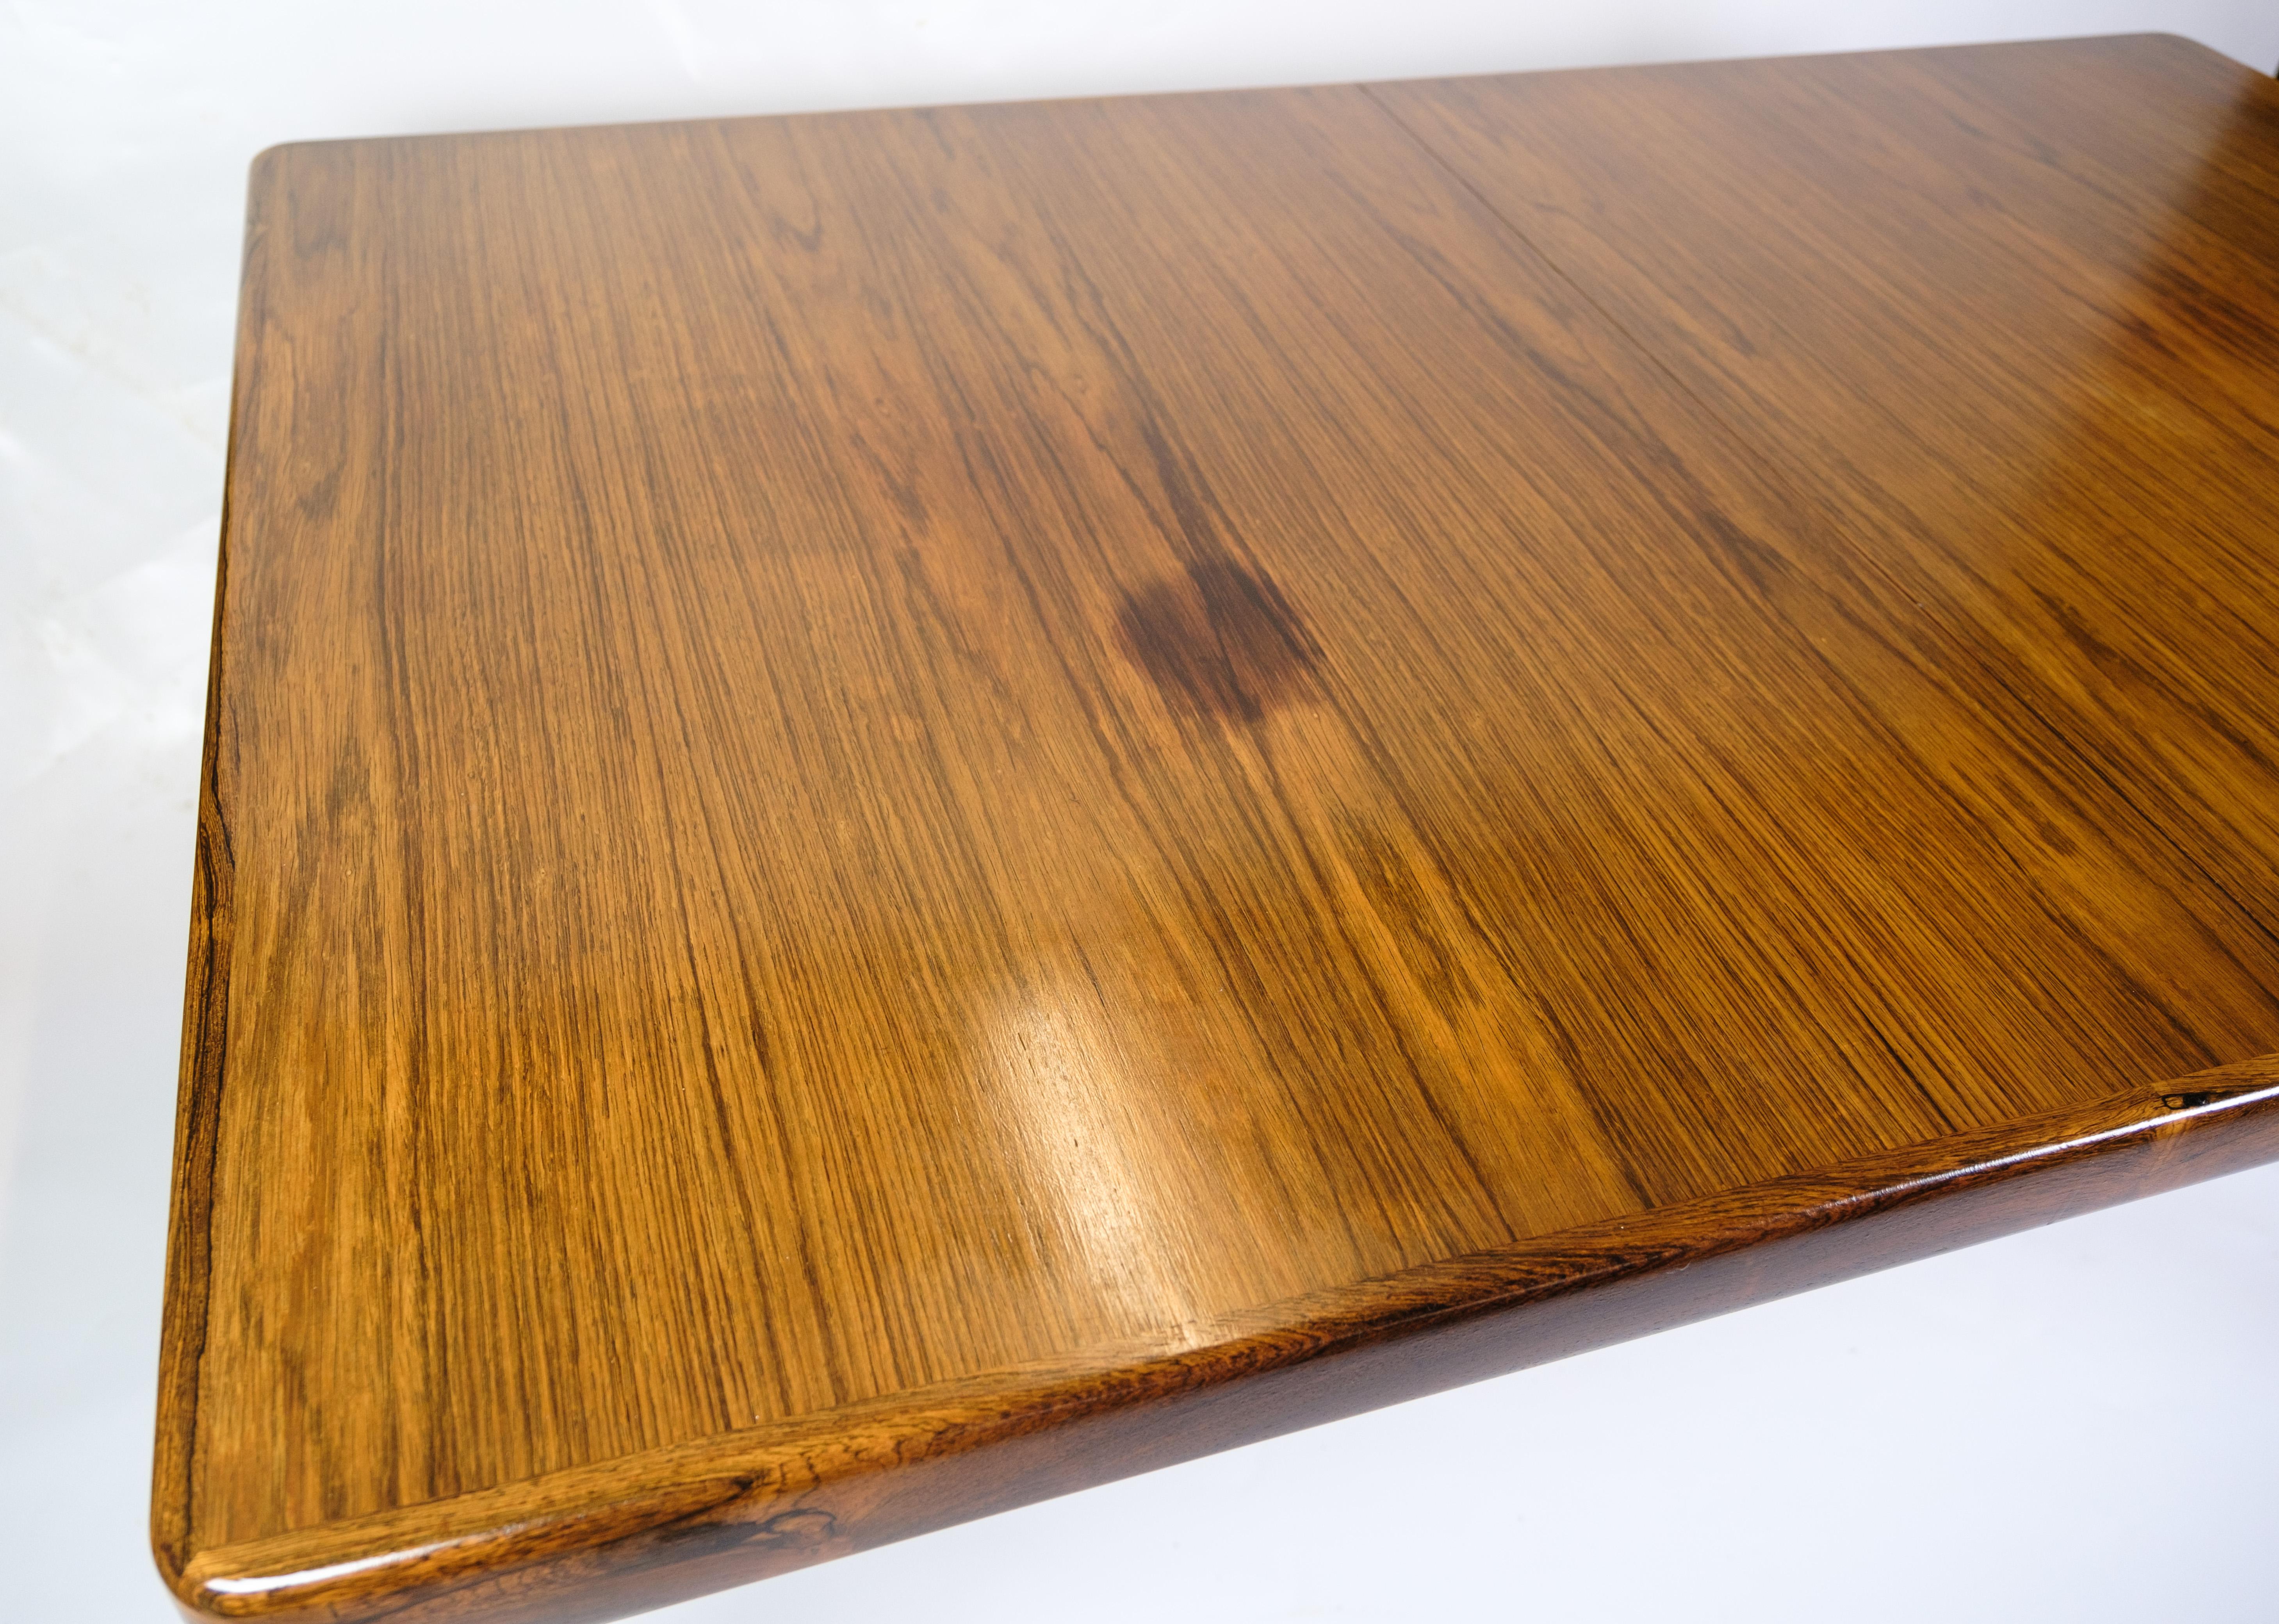 Mid-Century Modern Dining Table Made In Rosewood By Henry W. Klein Made By Bramin From 1960s For Sale